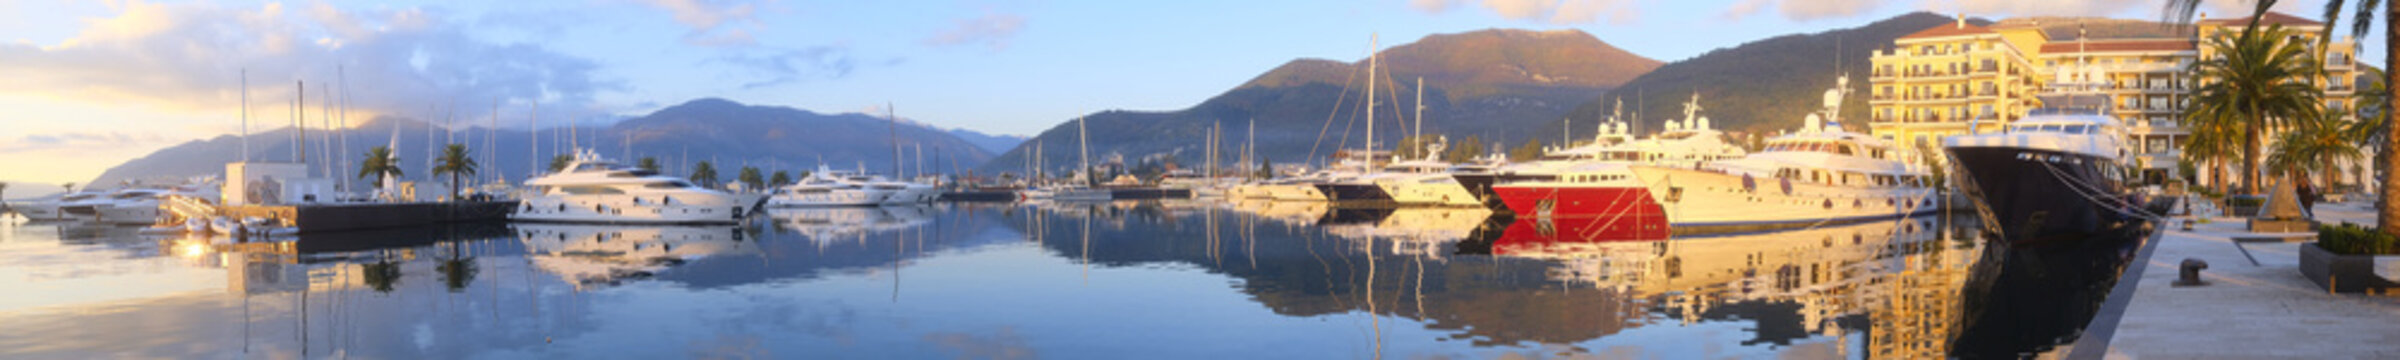 Panorama with the image of a Tivat harbour